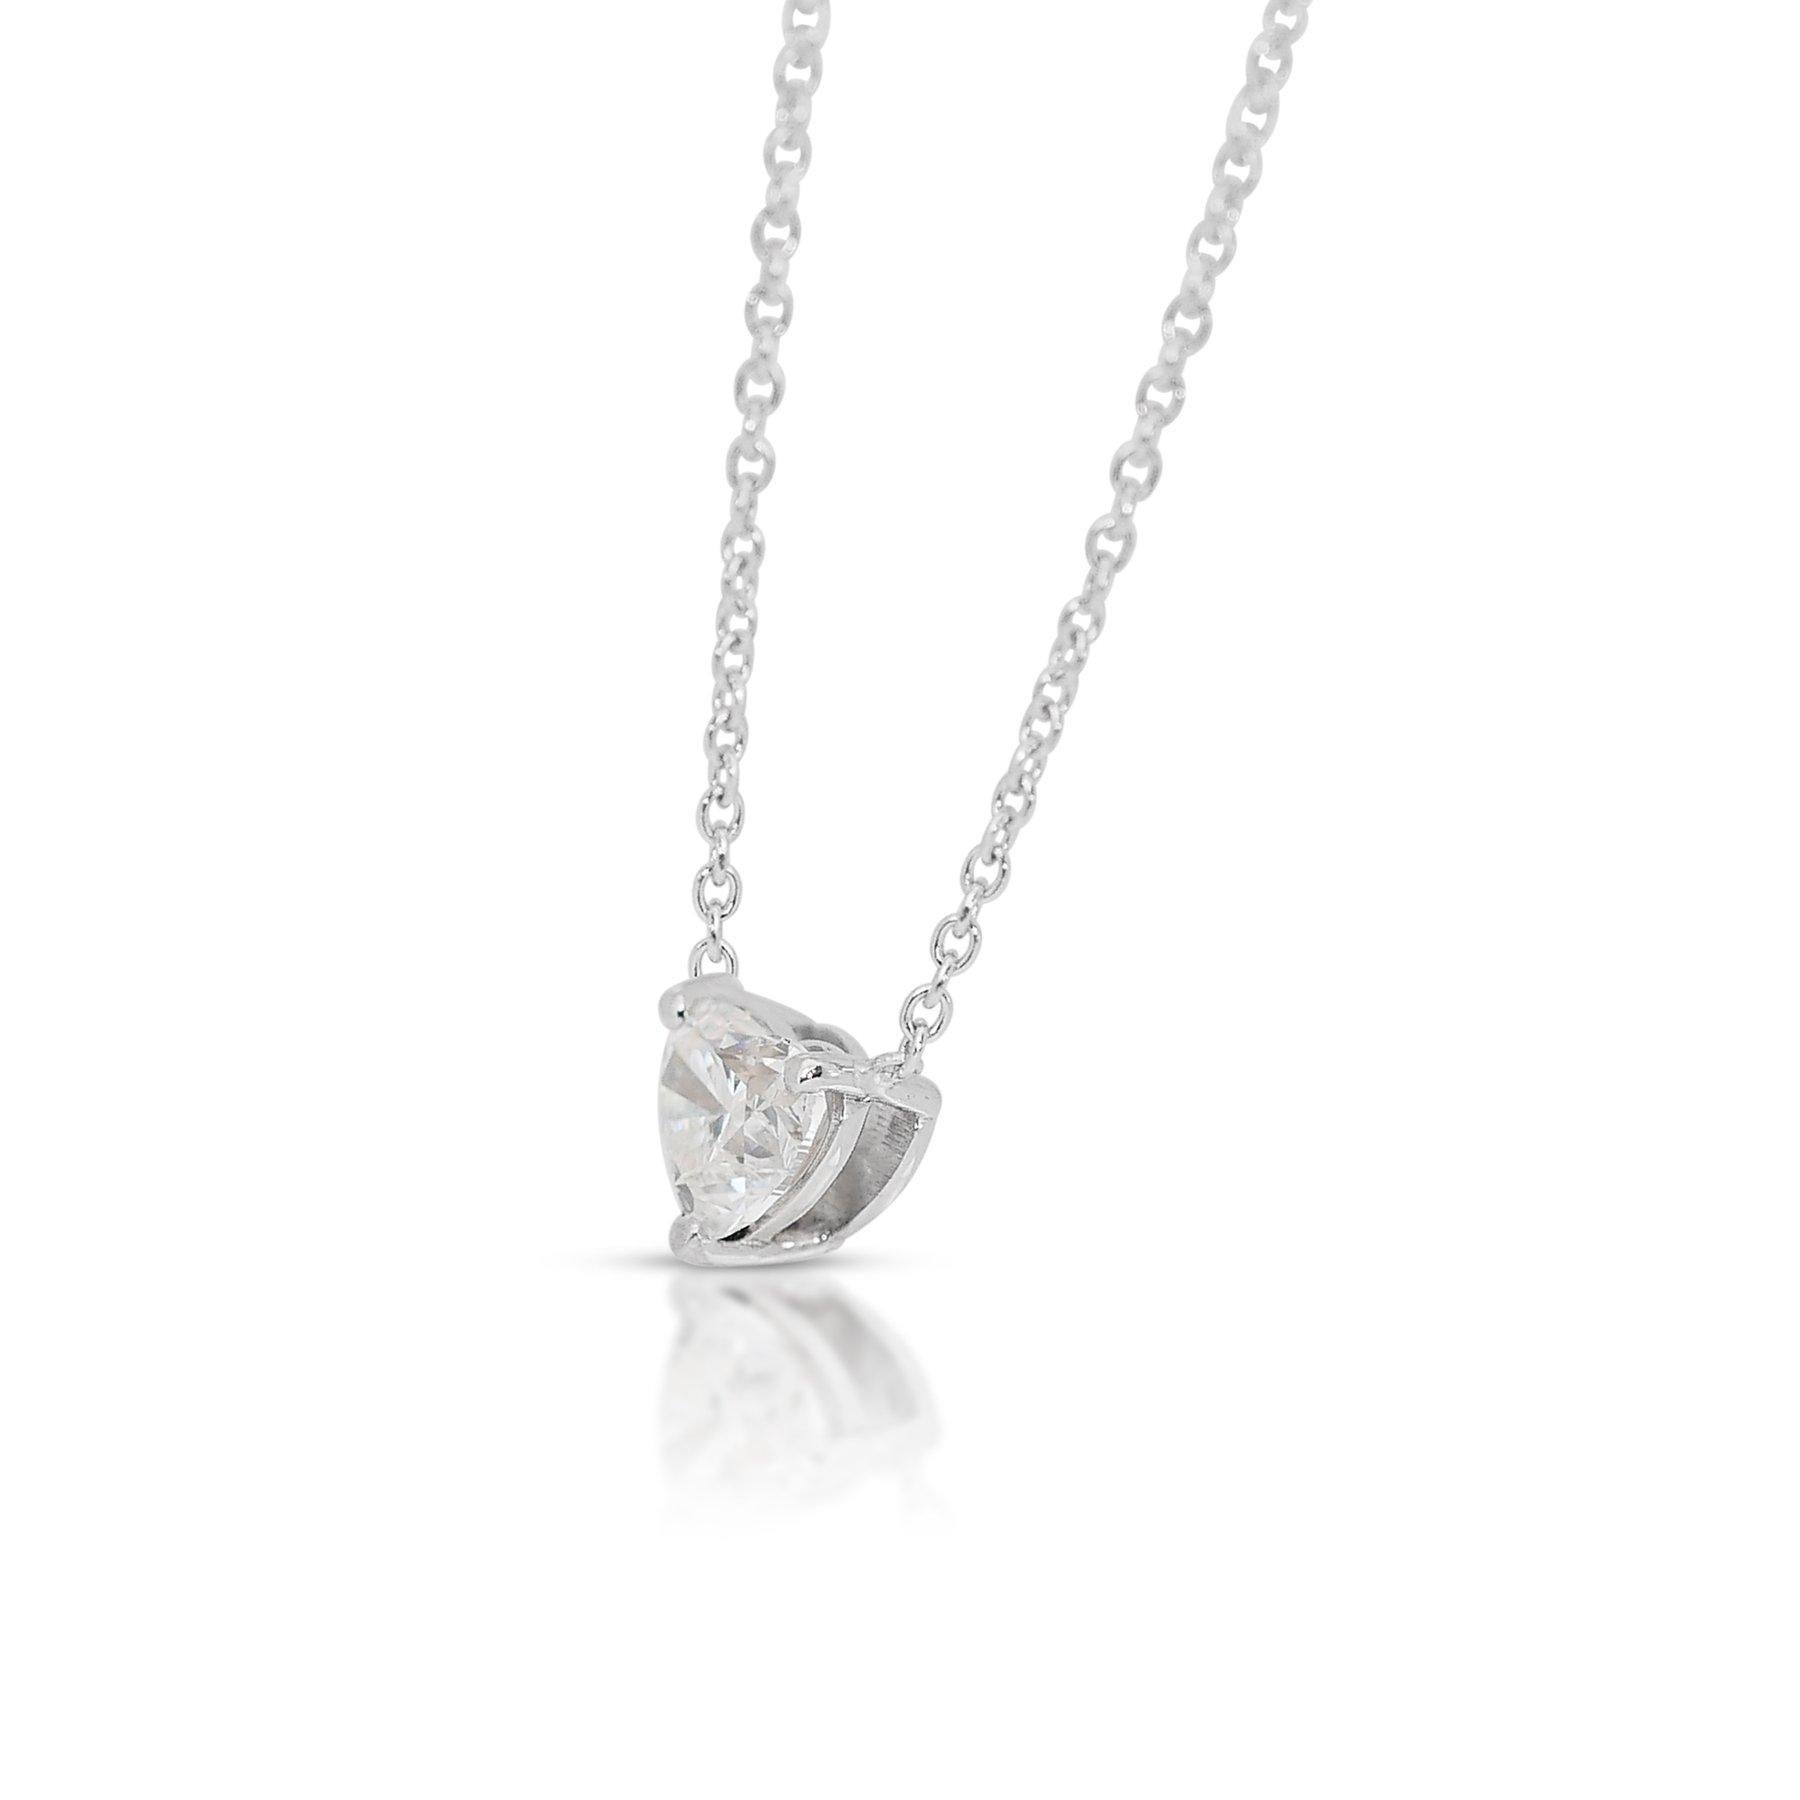 Enchanting 18k White Gold Heart-Shaped Diamond Solitaire Pendant Necklace w/0.71 ct - IGI Certified 

Introducing a captivating 18k white gold diamond solitaire necklace that embodies love and elegance in equal measure. At the core of this exquisite